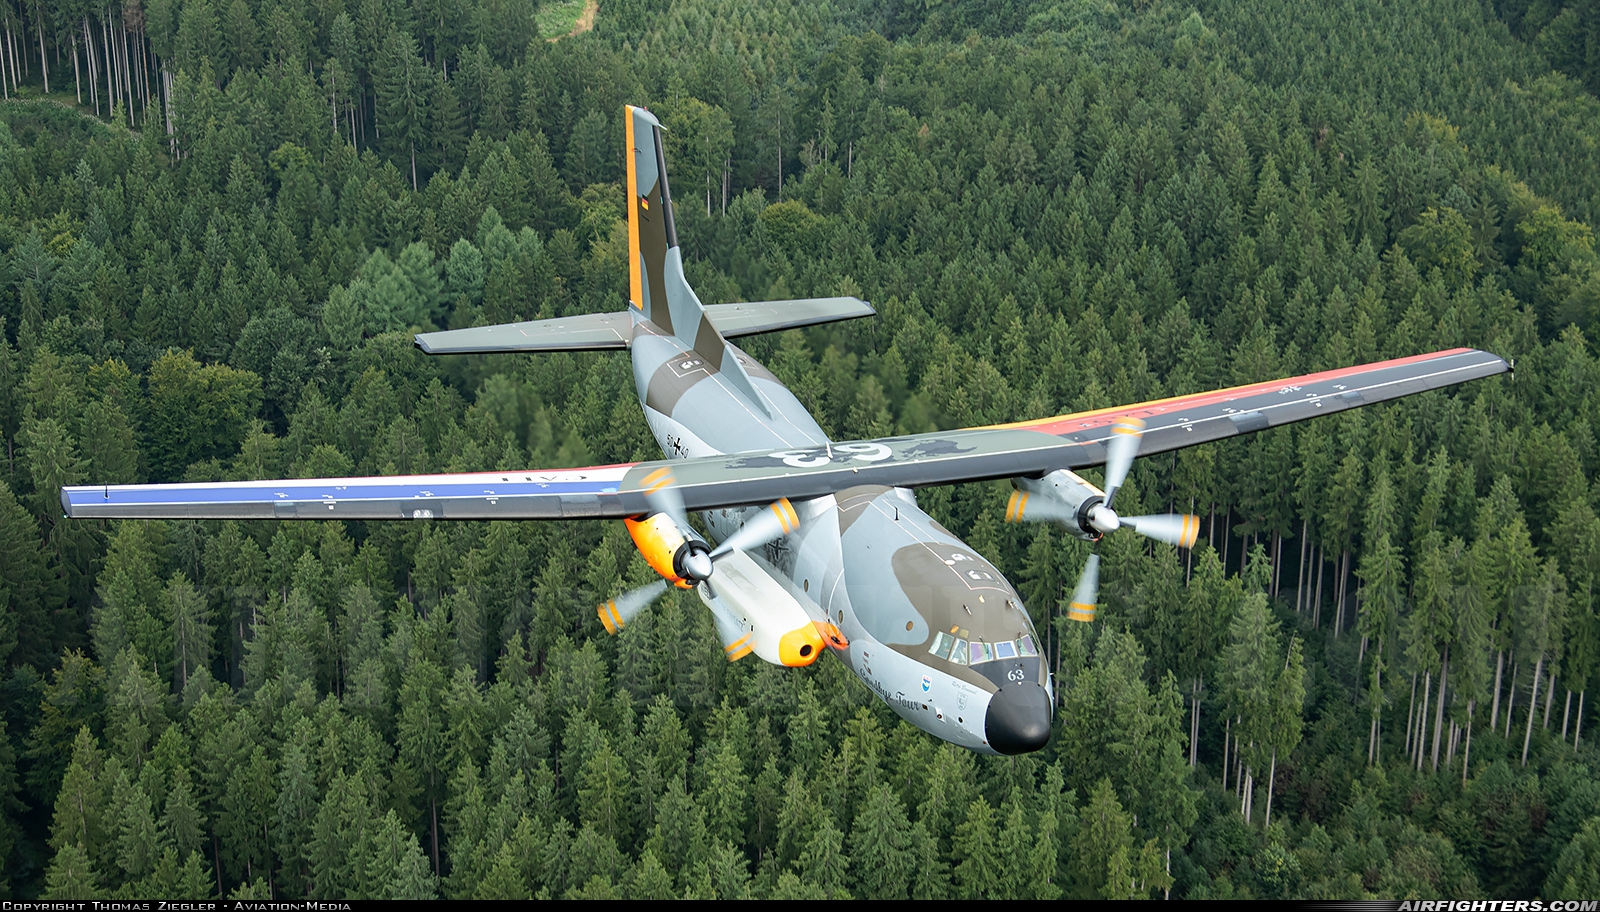 Germany - Air Force Transport Allianz C-160D 50+40 at In Flight, Germany